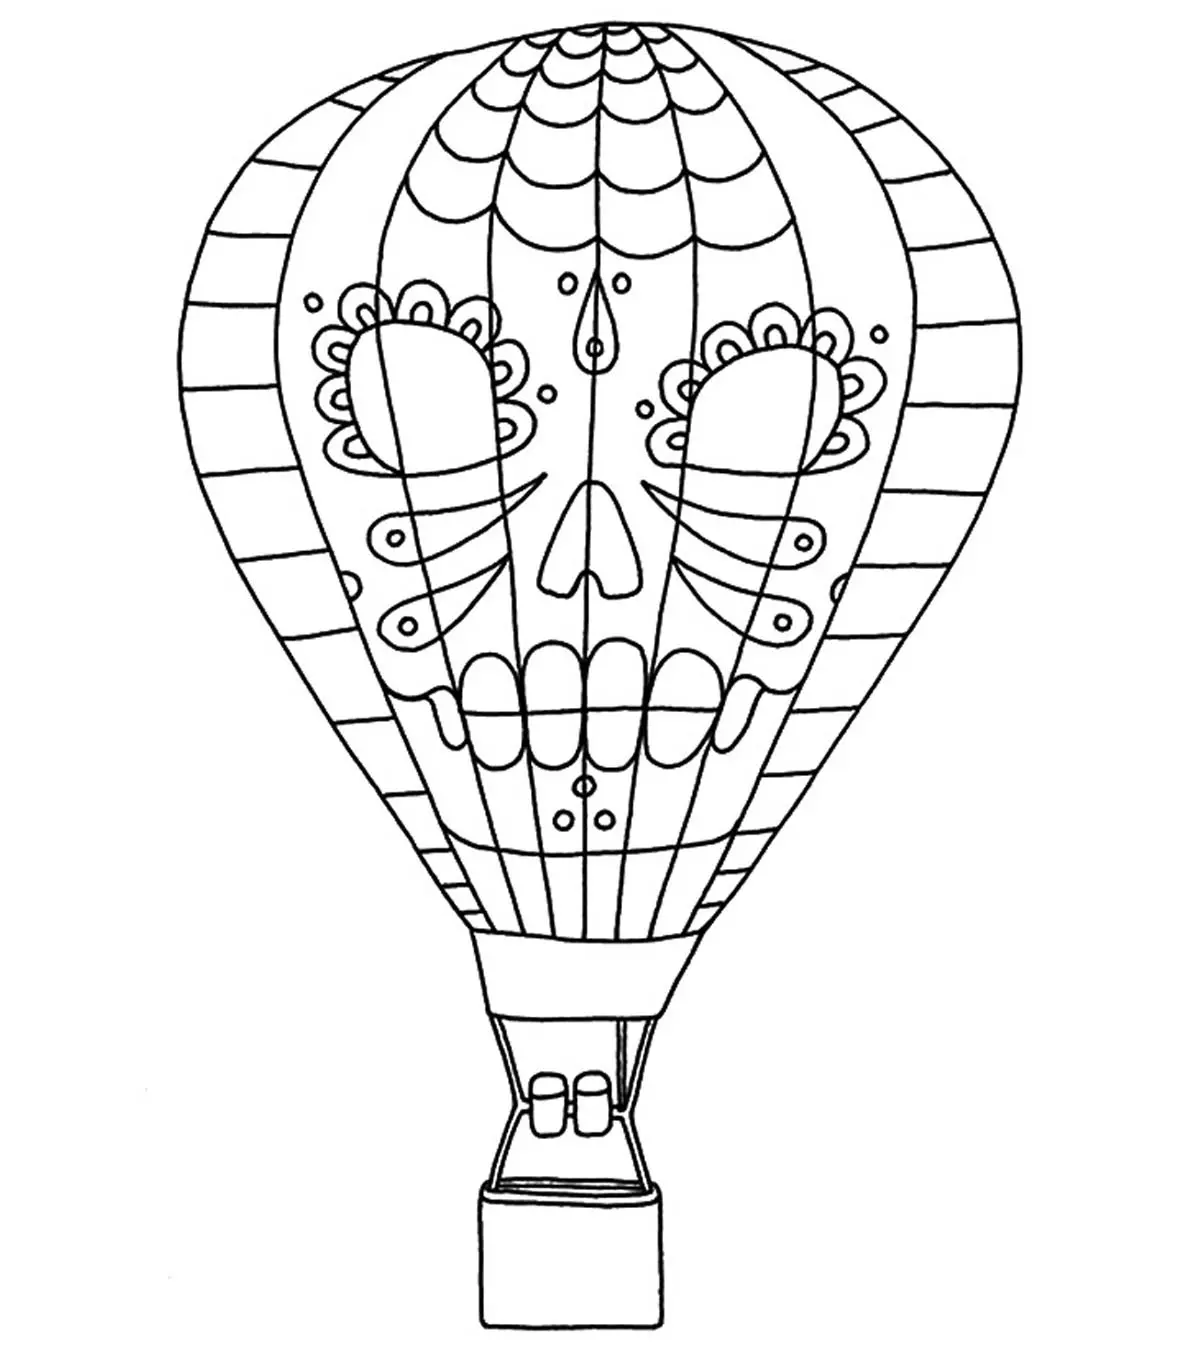 Top 10 Hot Air Balloon Coloring Pages For Your Little Ones